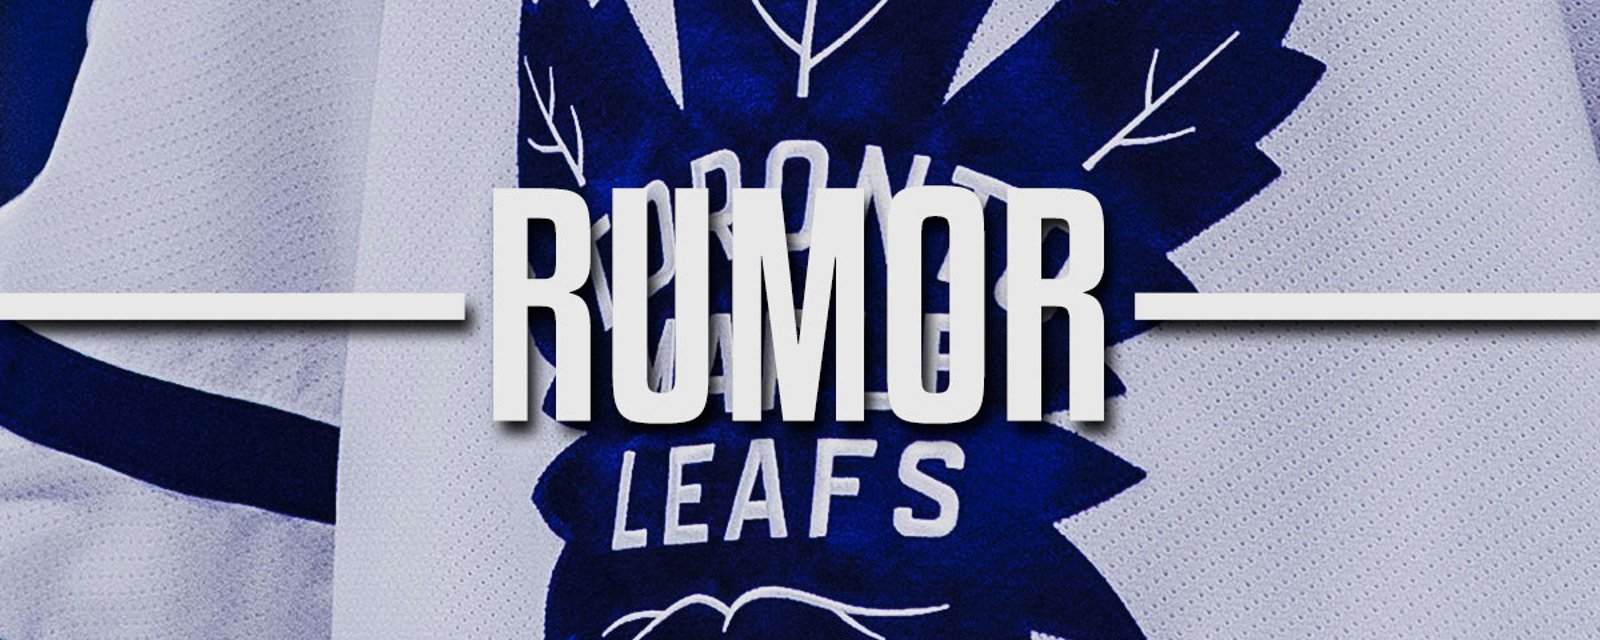 Leafs rumored to be close to 7-year-contract extension with one of their players.